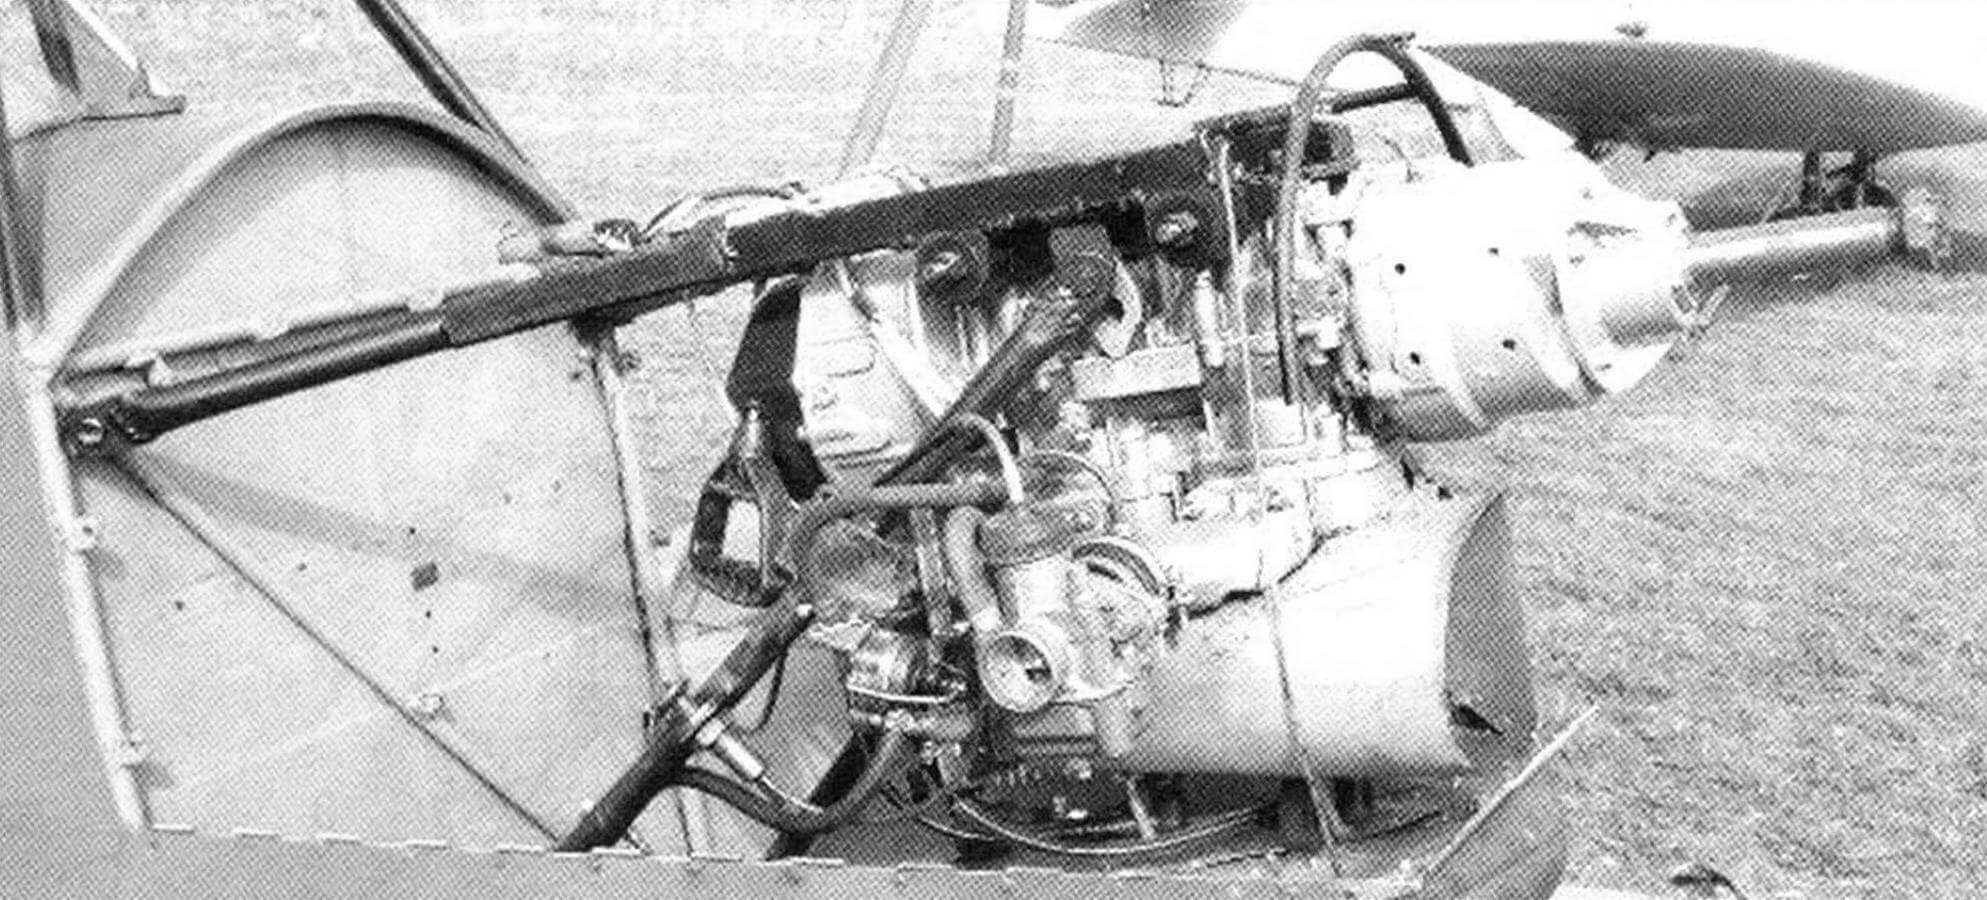 The UM3 440-02 engine from the Lynx snowmobile fit well into the contours of the fuselage and provided the aircraft with good flight performance